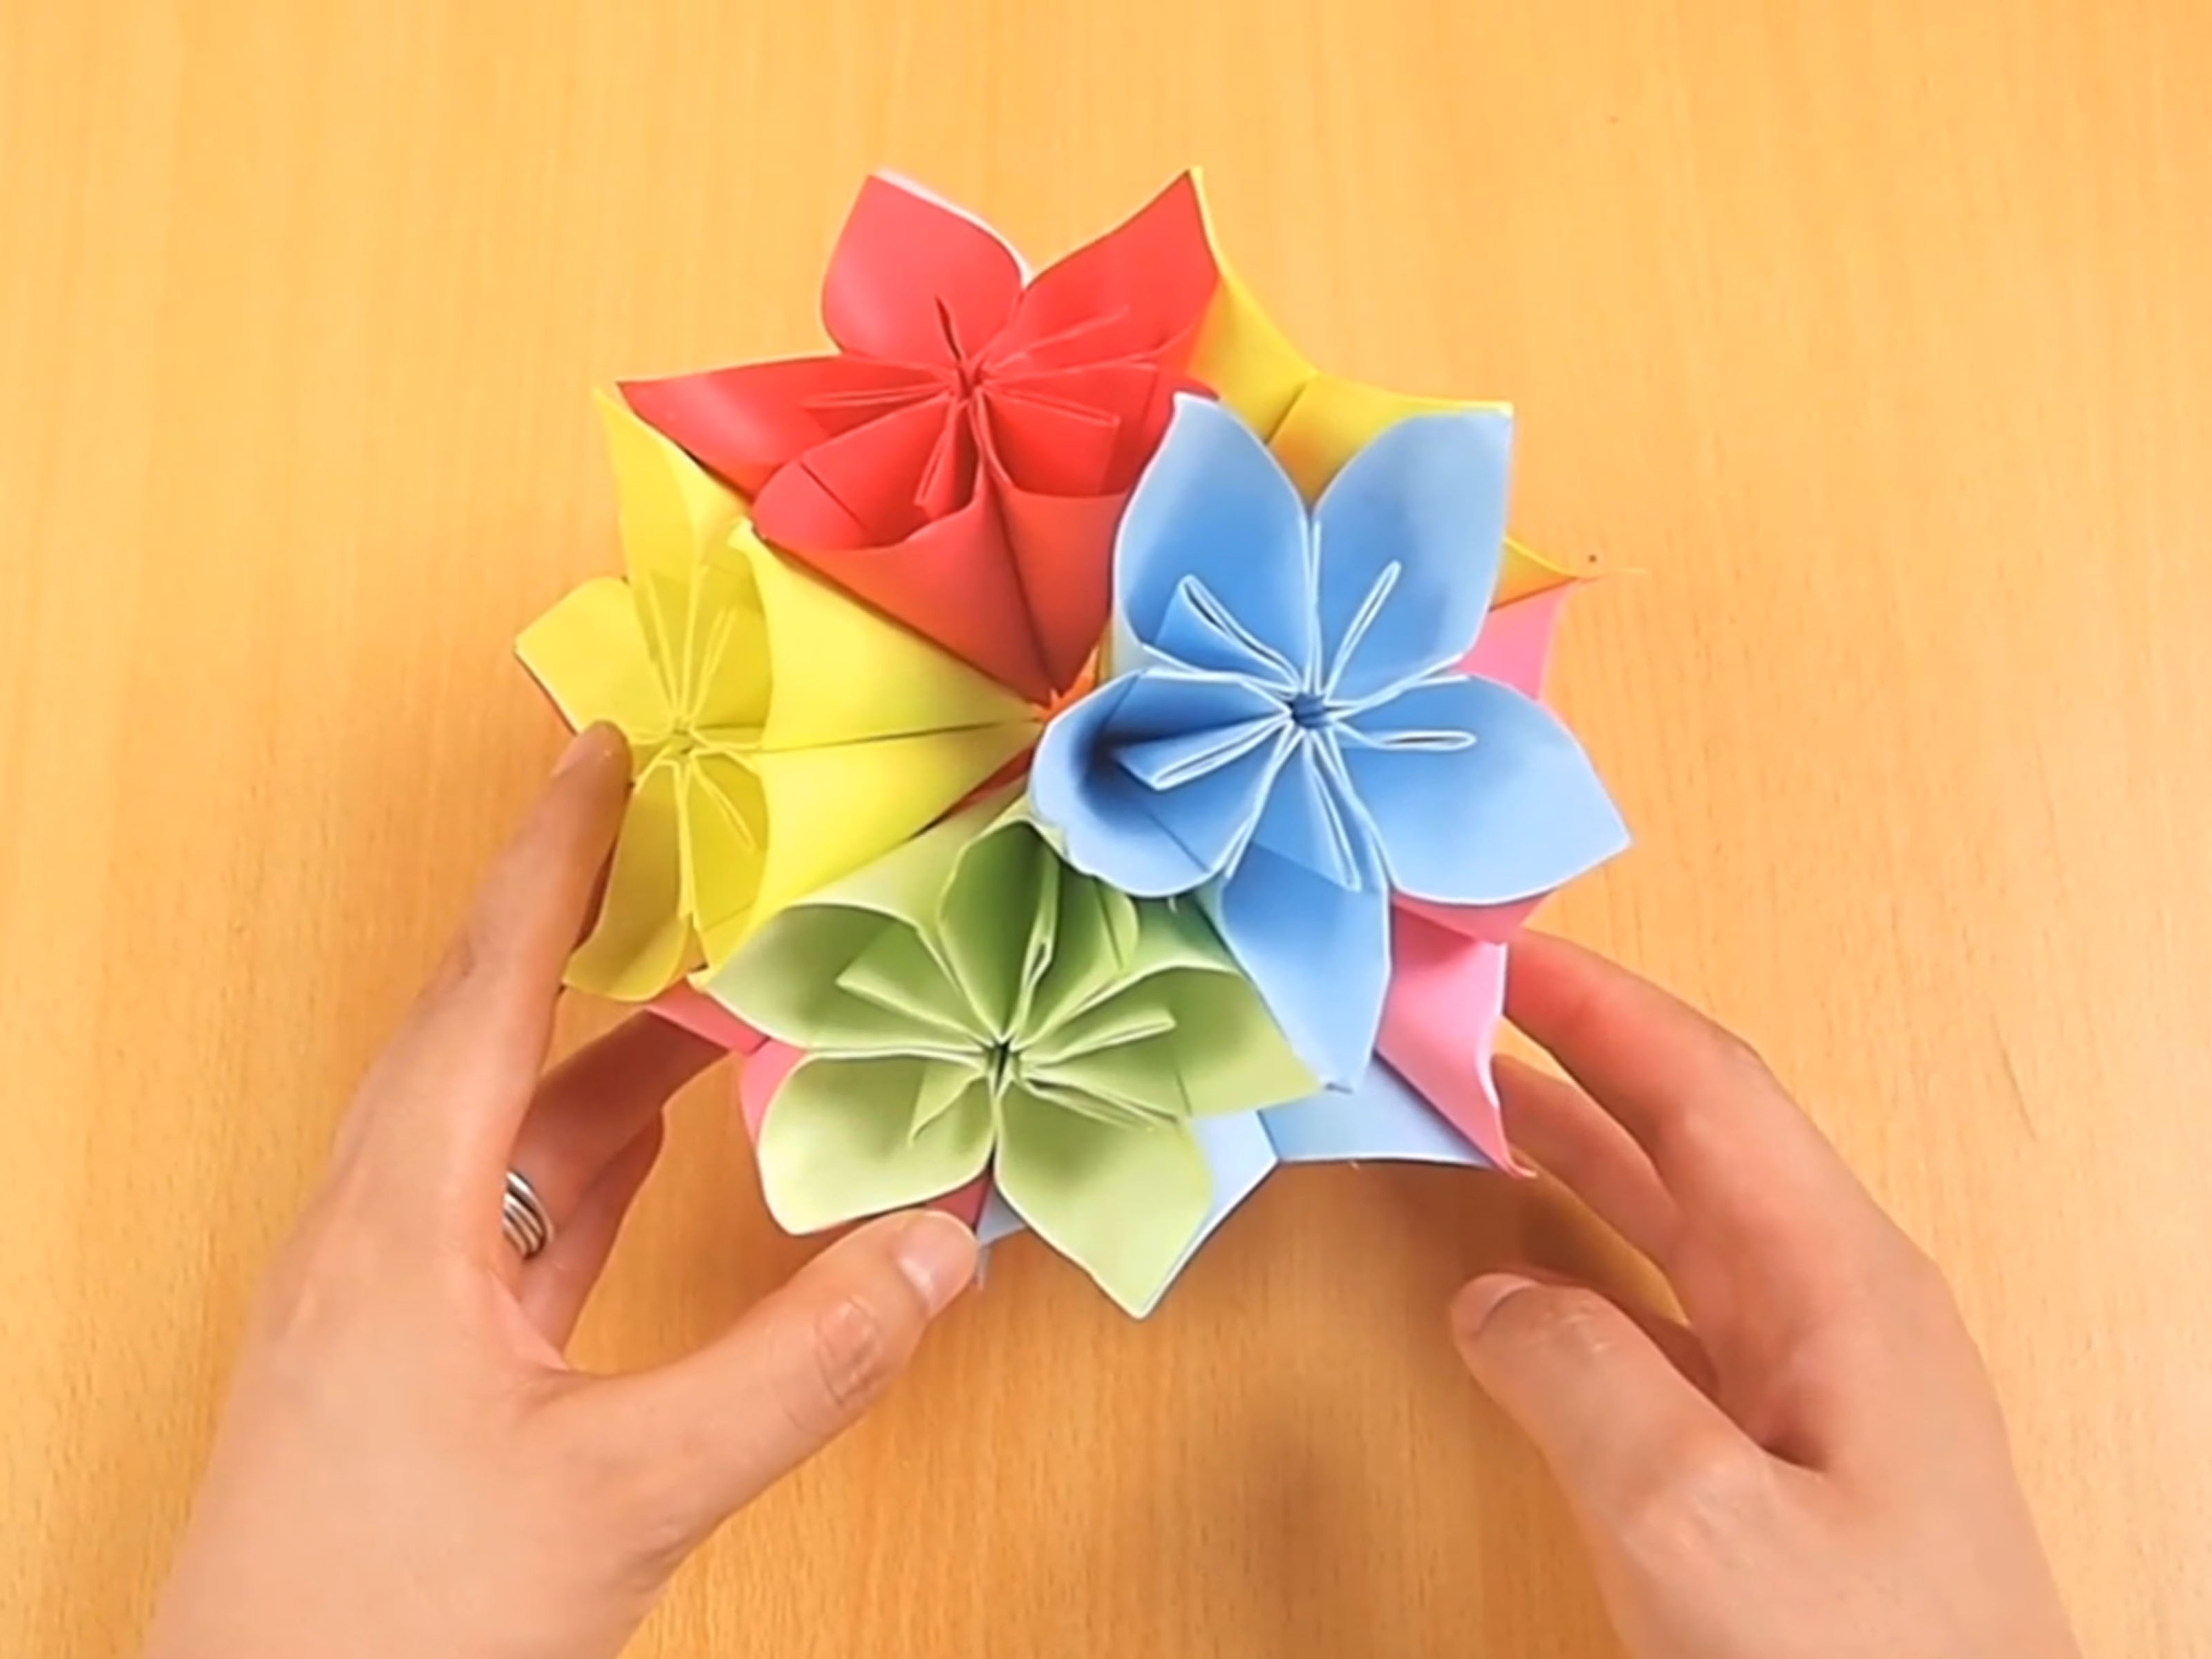 Origami Ball Instructions How To Make A Kusudama Ball 12 Steps With Pictures Wikihow